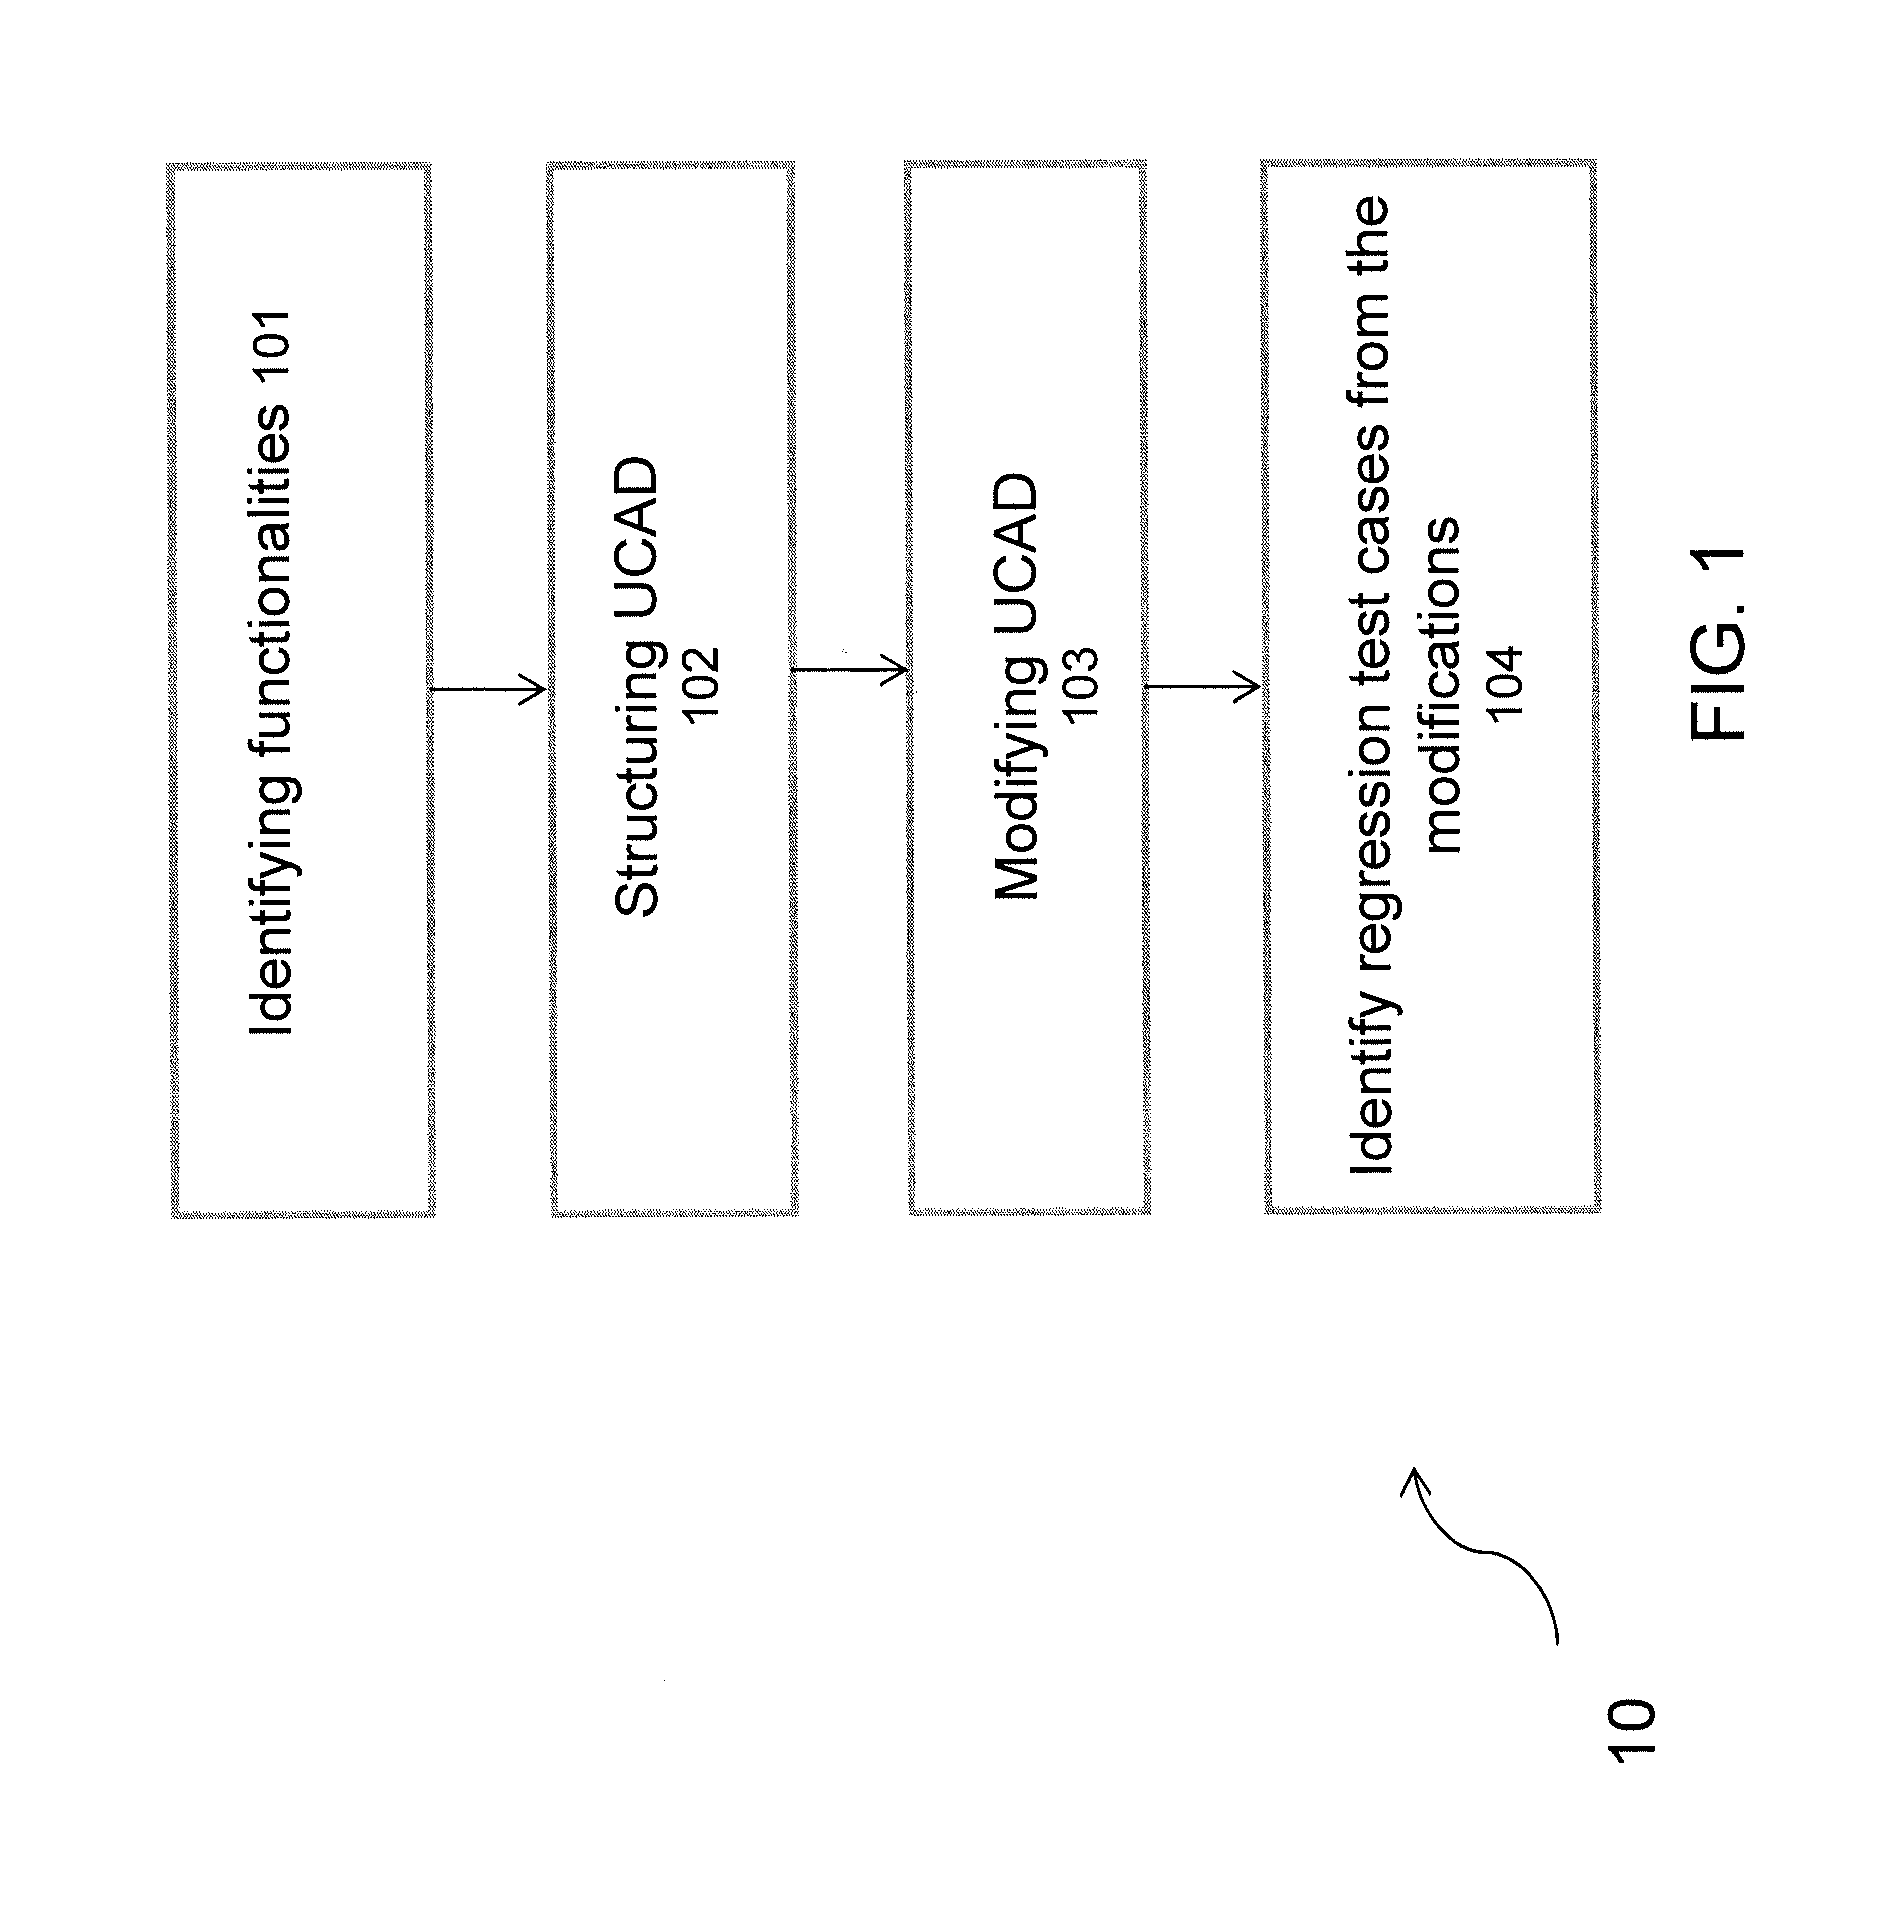 Method and system for identifying regression test cases for a software